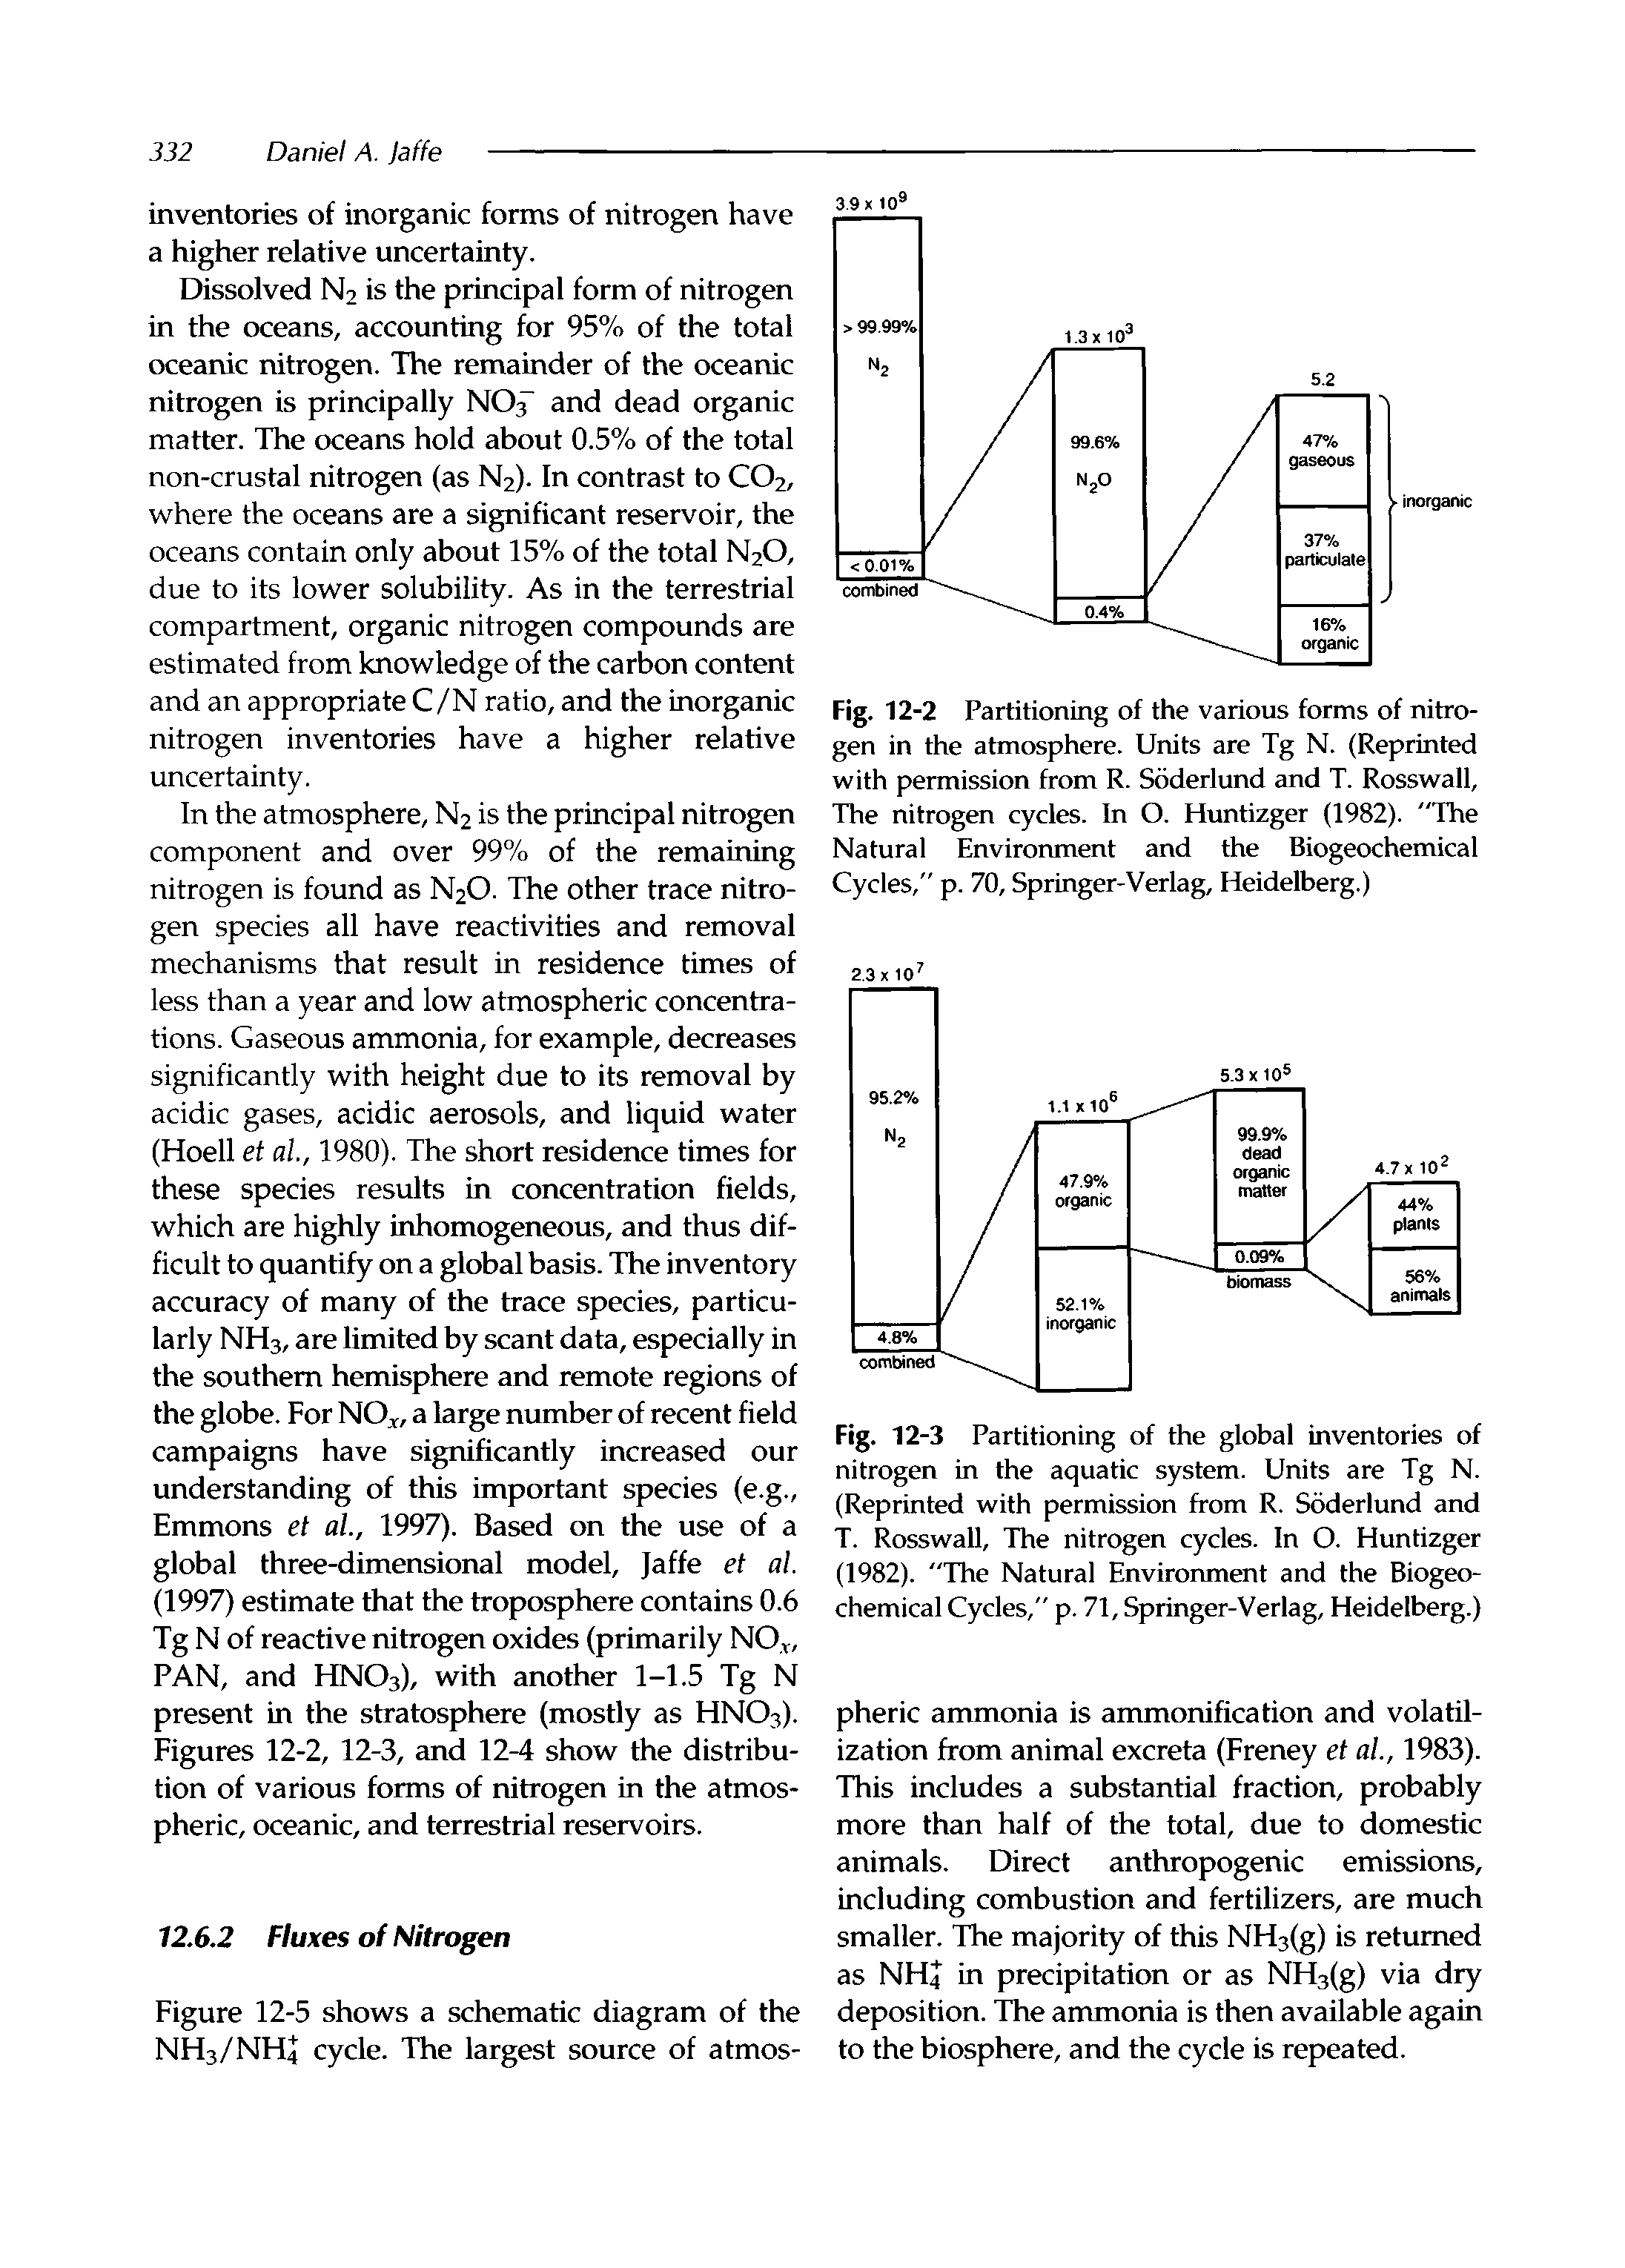 Fig. 12-2 Partitioning of the various forms of nitrogen in the atmosphere. Units are Tg N. (Reprinted with permission from R. Soderlund and T. Rosswall, The nitrogen cycles. In O. Huntizger (1982). "The Natural Environment and the Biogeochemical Cycles," p. 70, Springer-Verlag, Heidelberg.)...